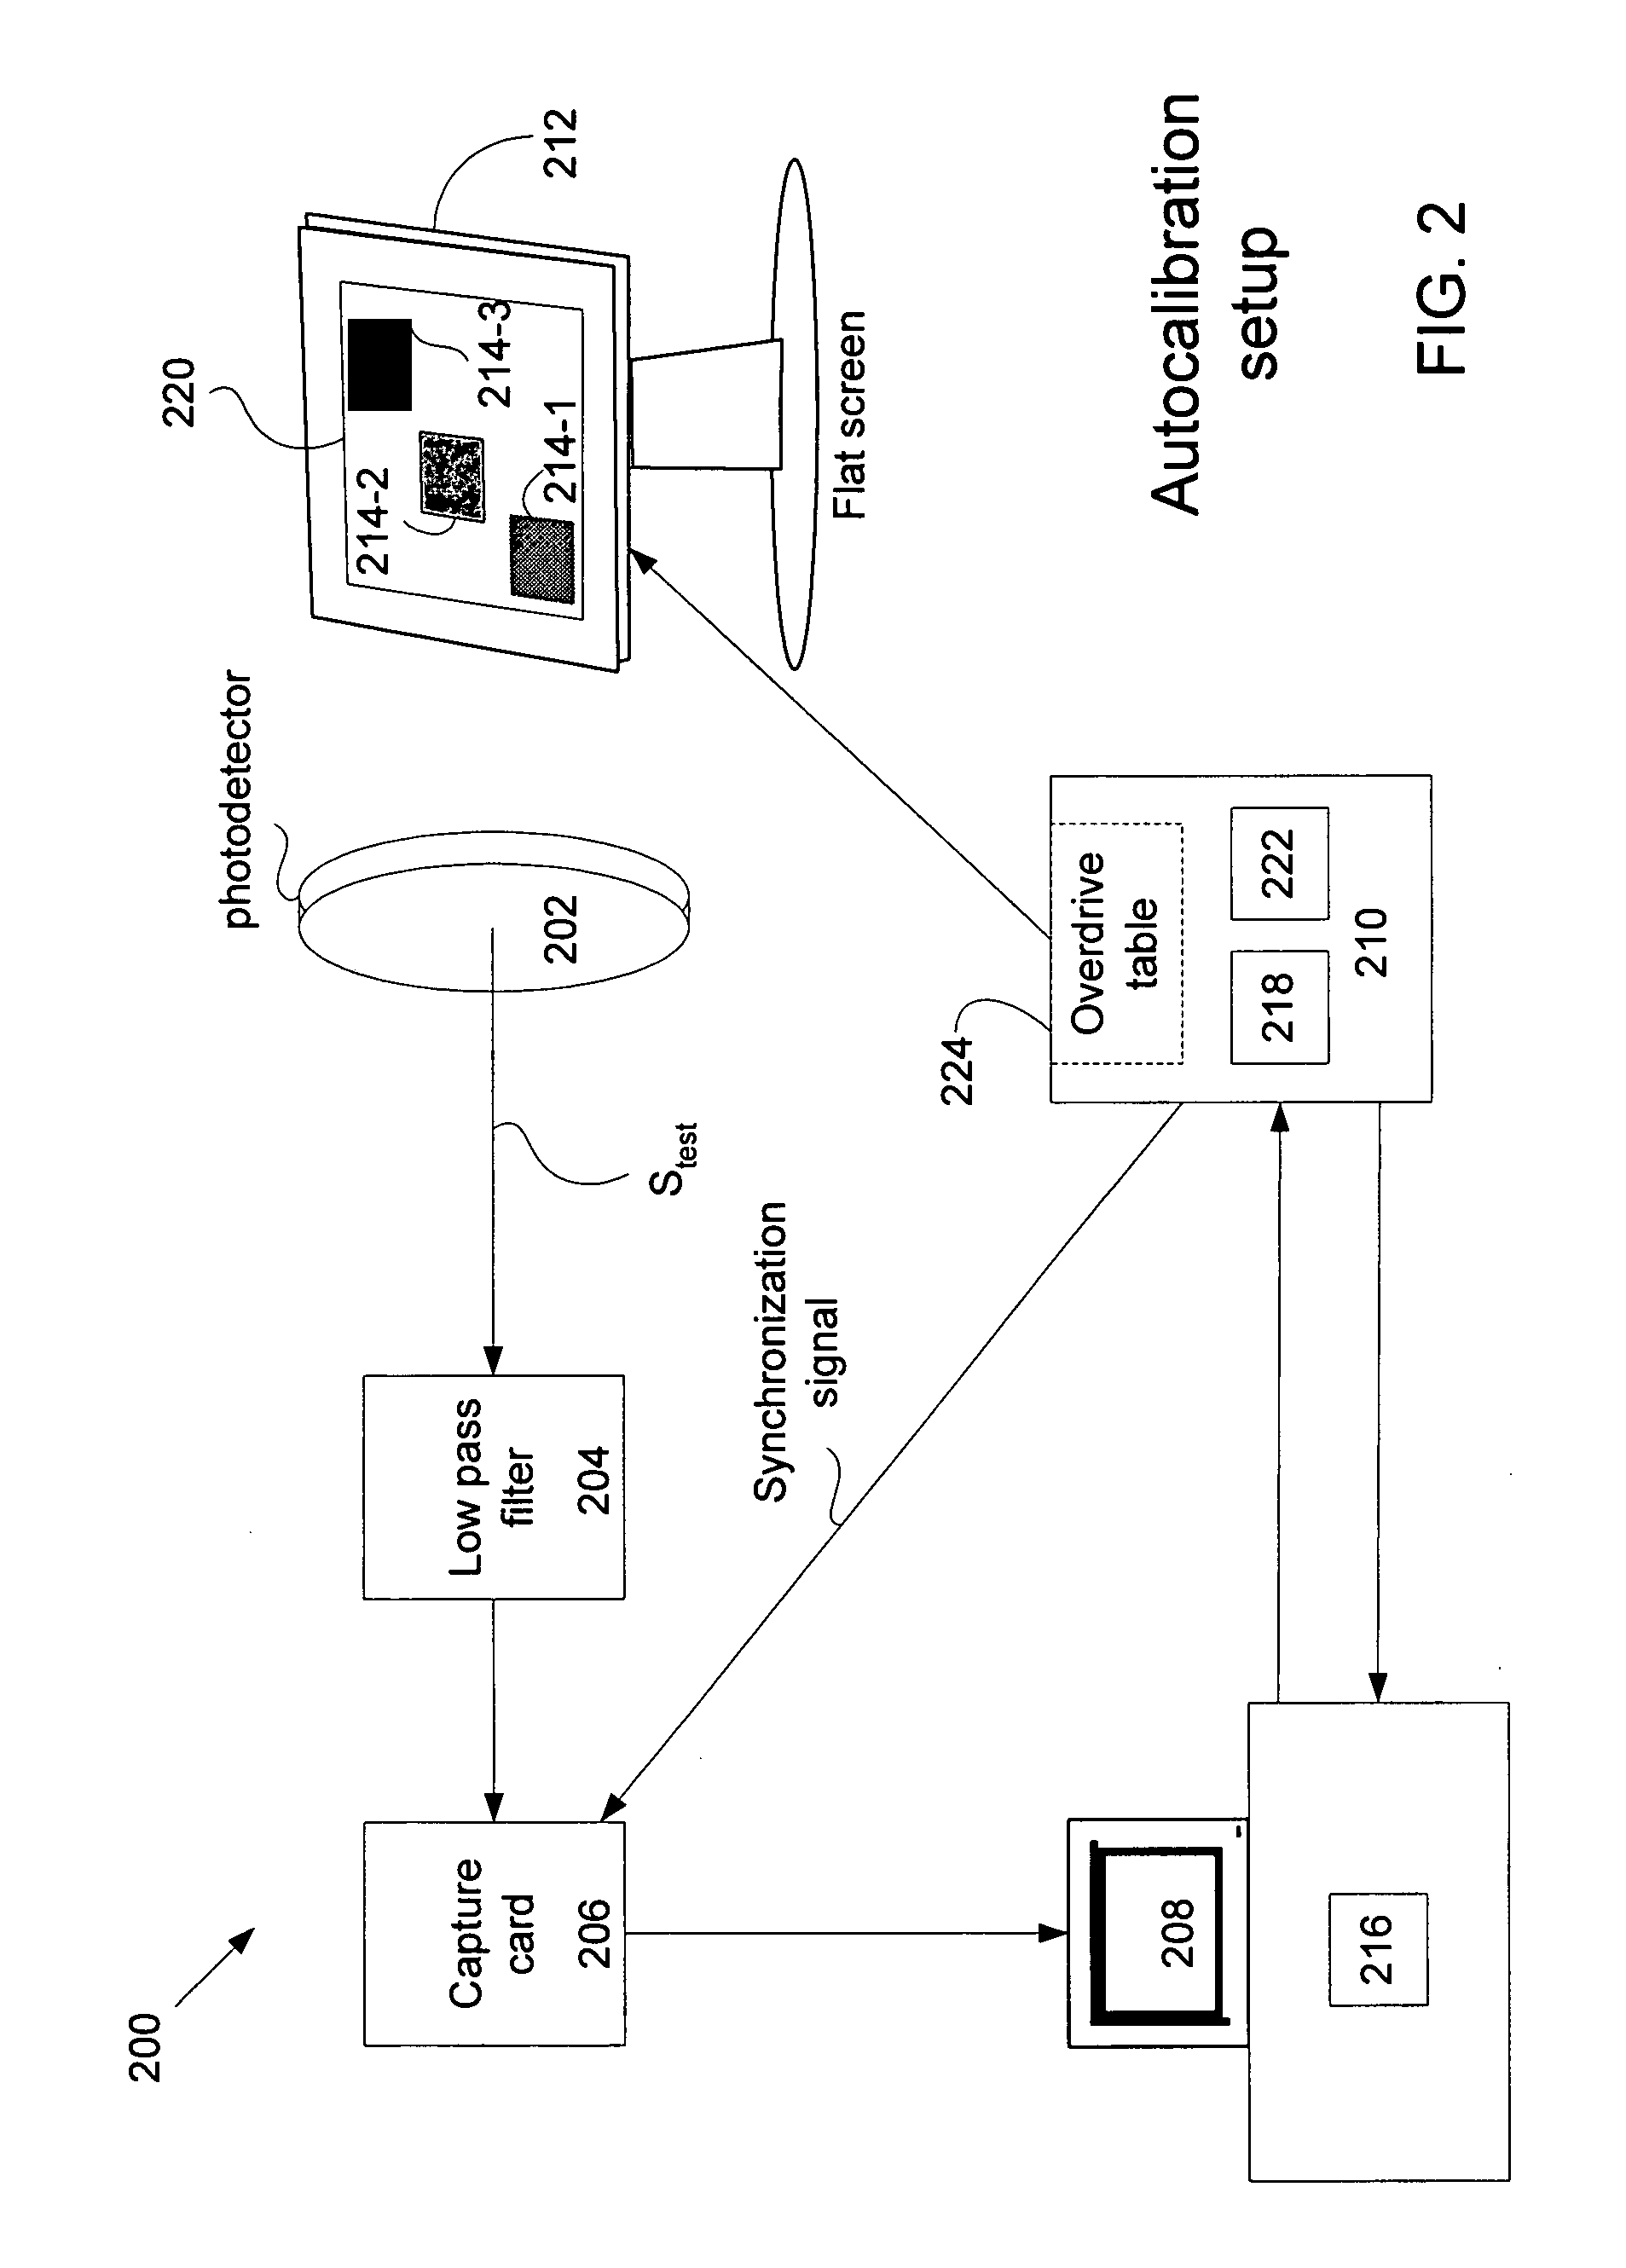 LCD overdrive auto-calibration apparatus and method